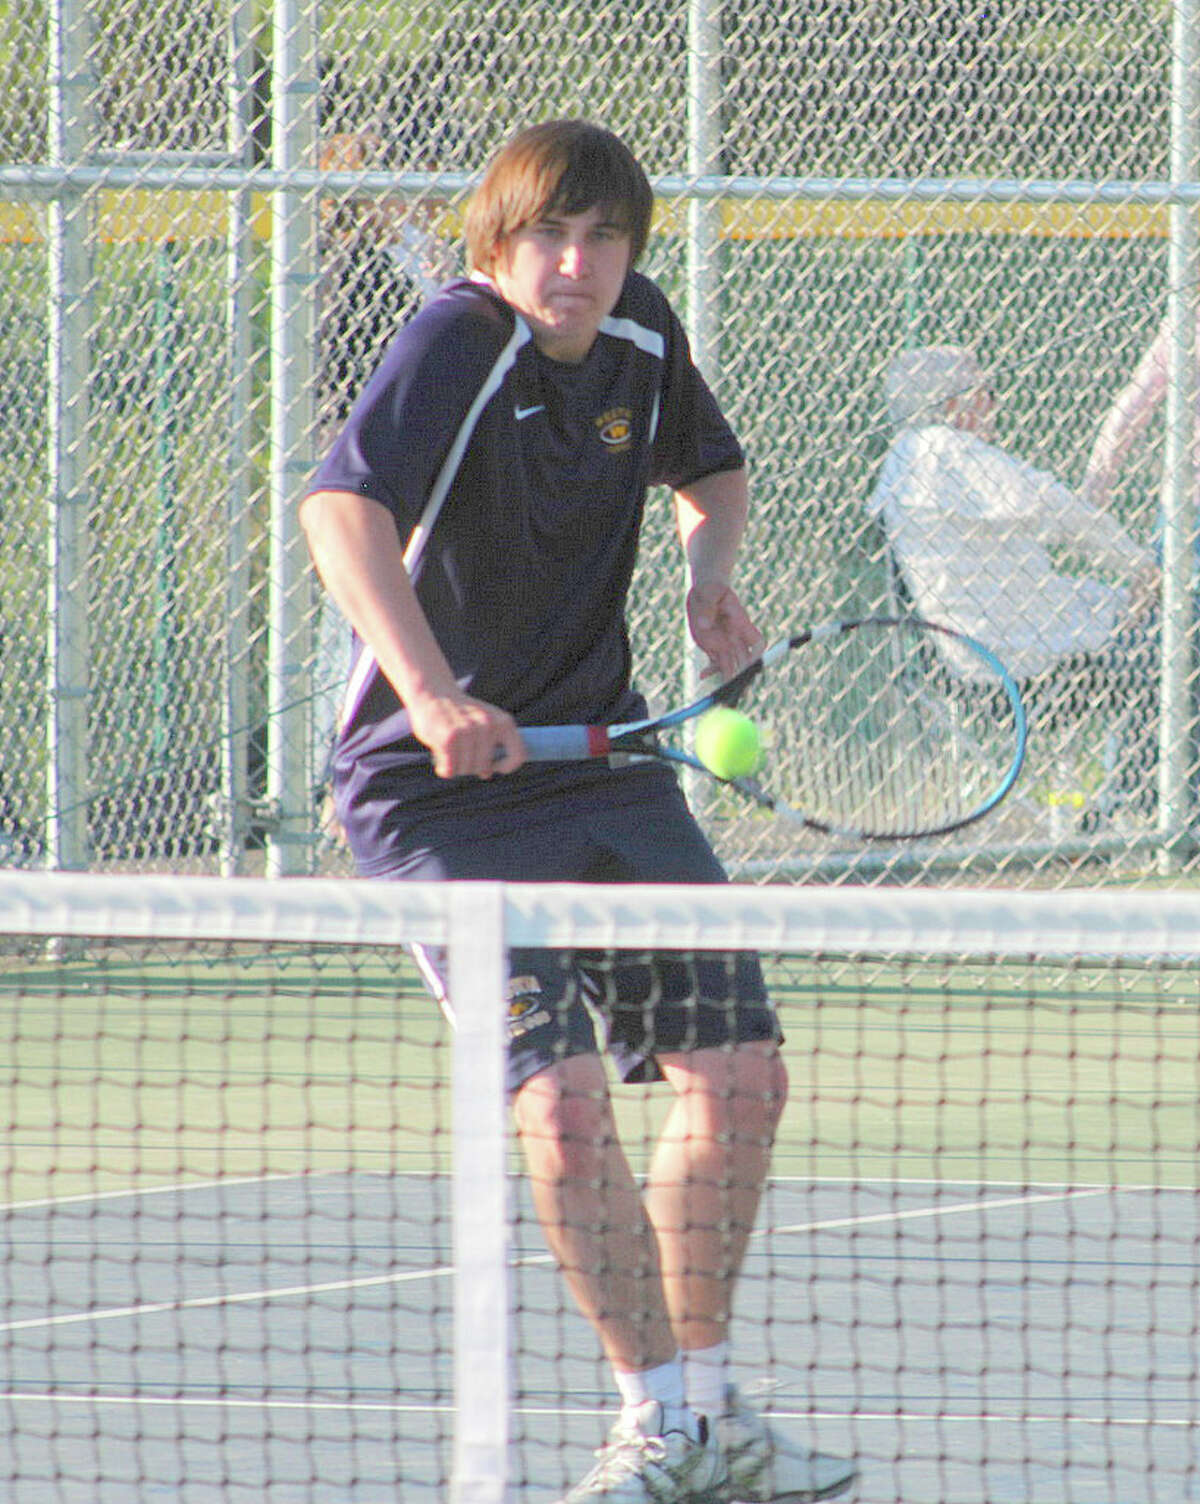 Weston sophomore Ben Lander, above, combined with freshman Henry Morris Monday in a 6-3, 6-2 victory at third doubles at Newtown. The Trojans beat Newtown, 5-2.